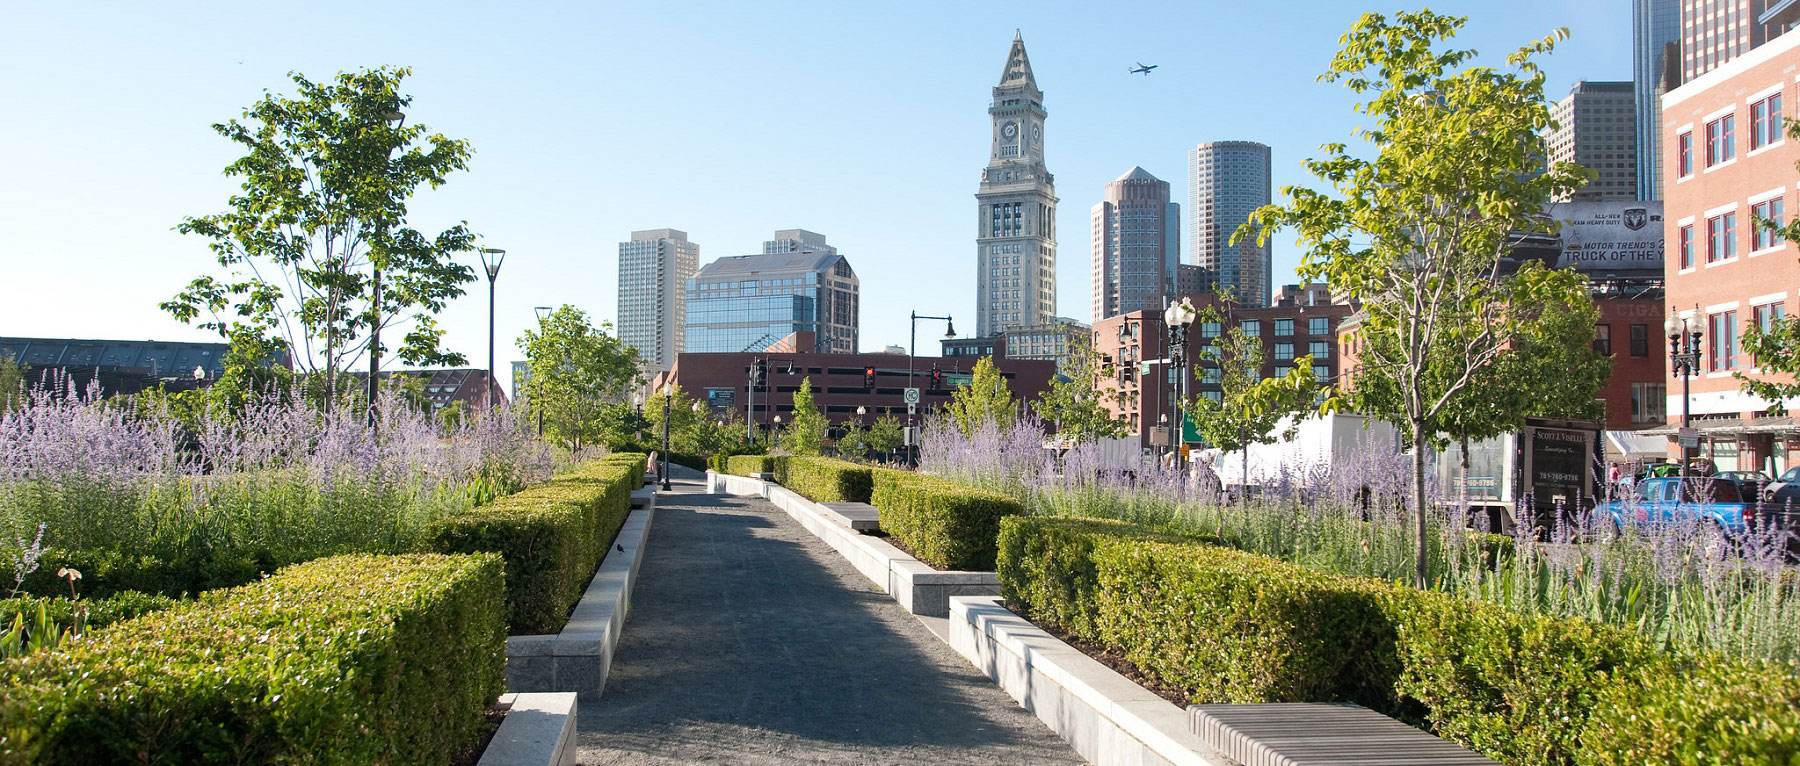 Rose Kennedy Greenway in Boston, MA - Photo Credit Massachusetts Office of Travel & Tourism